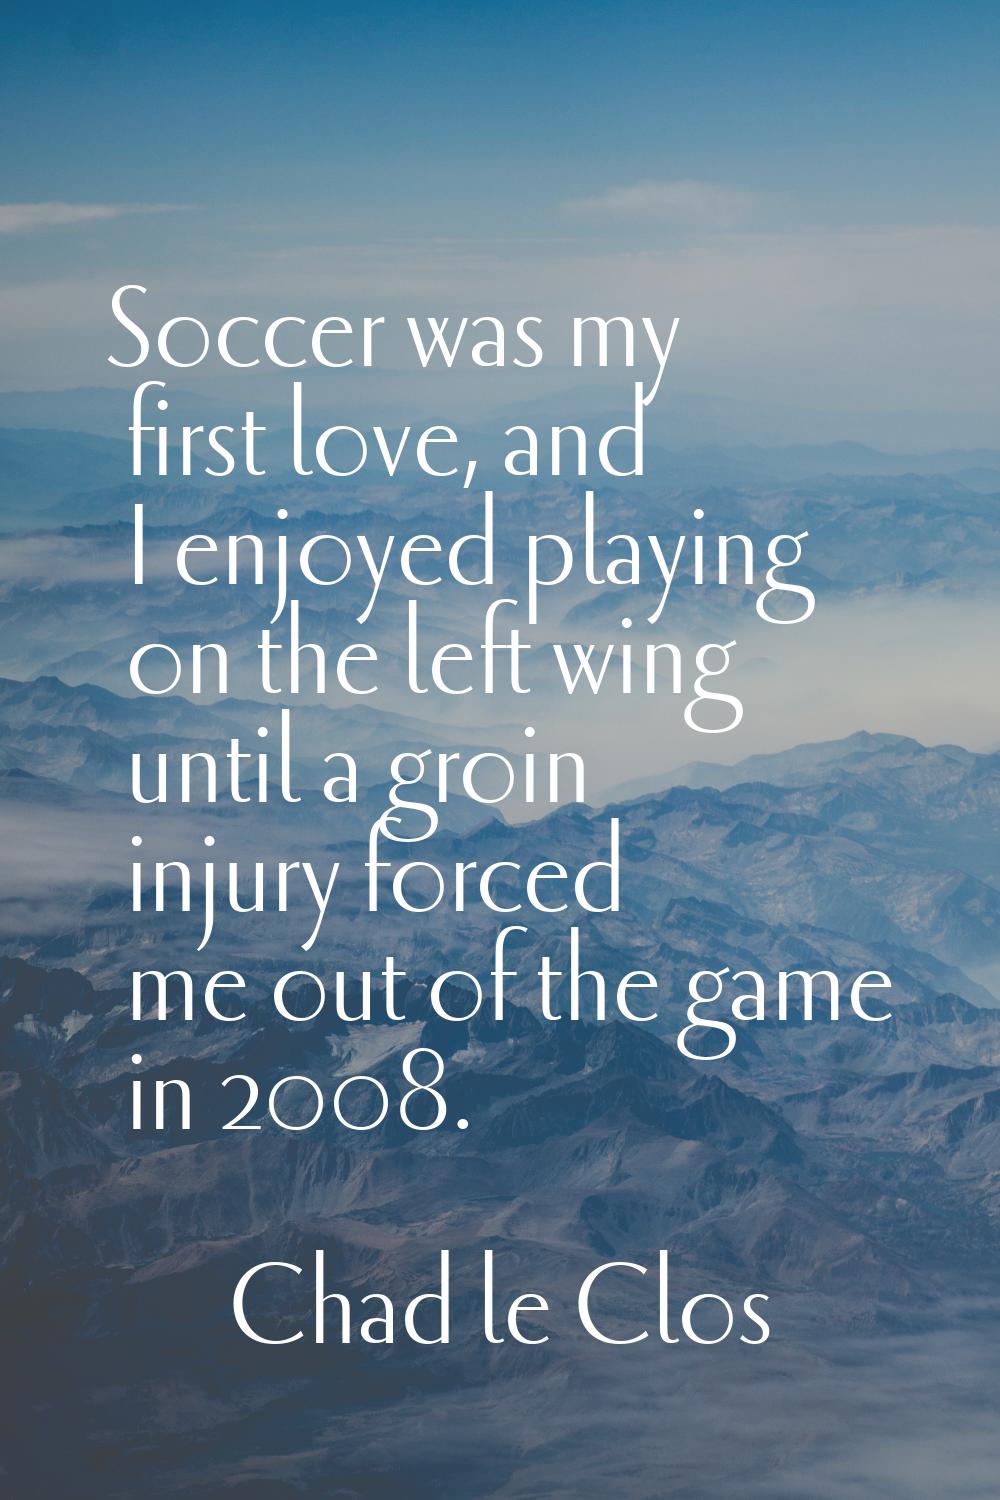 Soccer was my first love, and I enjoyed playing on the left wing until a groin injury forced me out